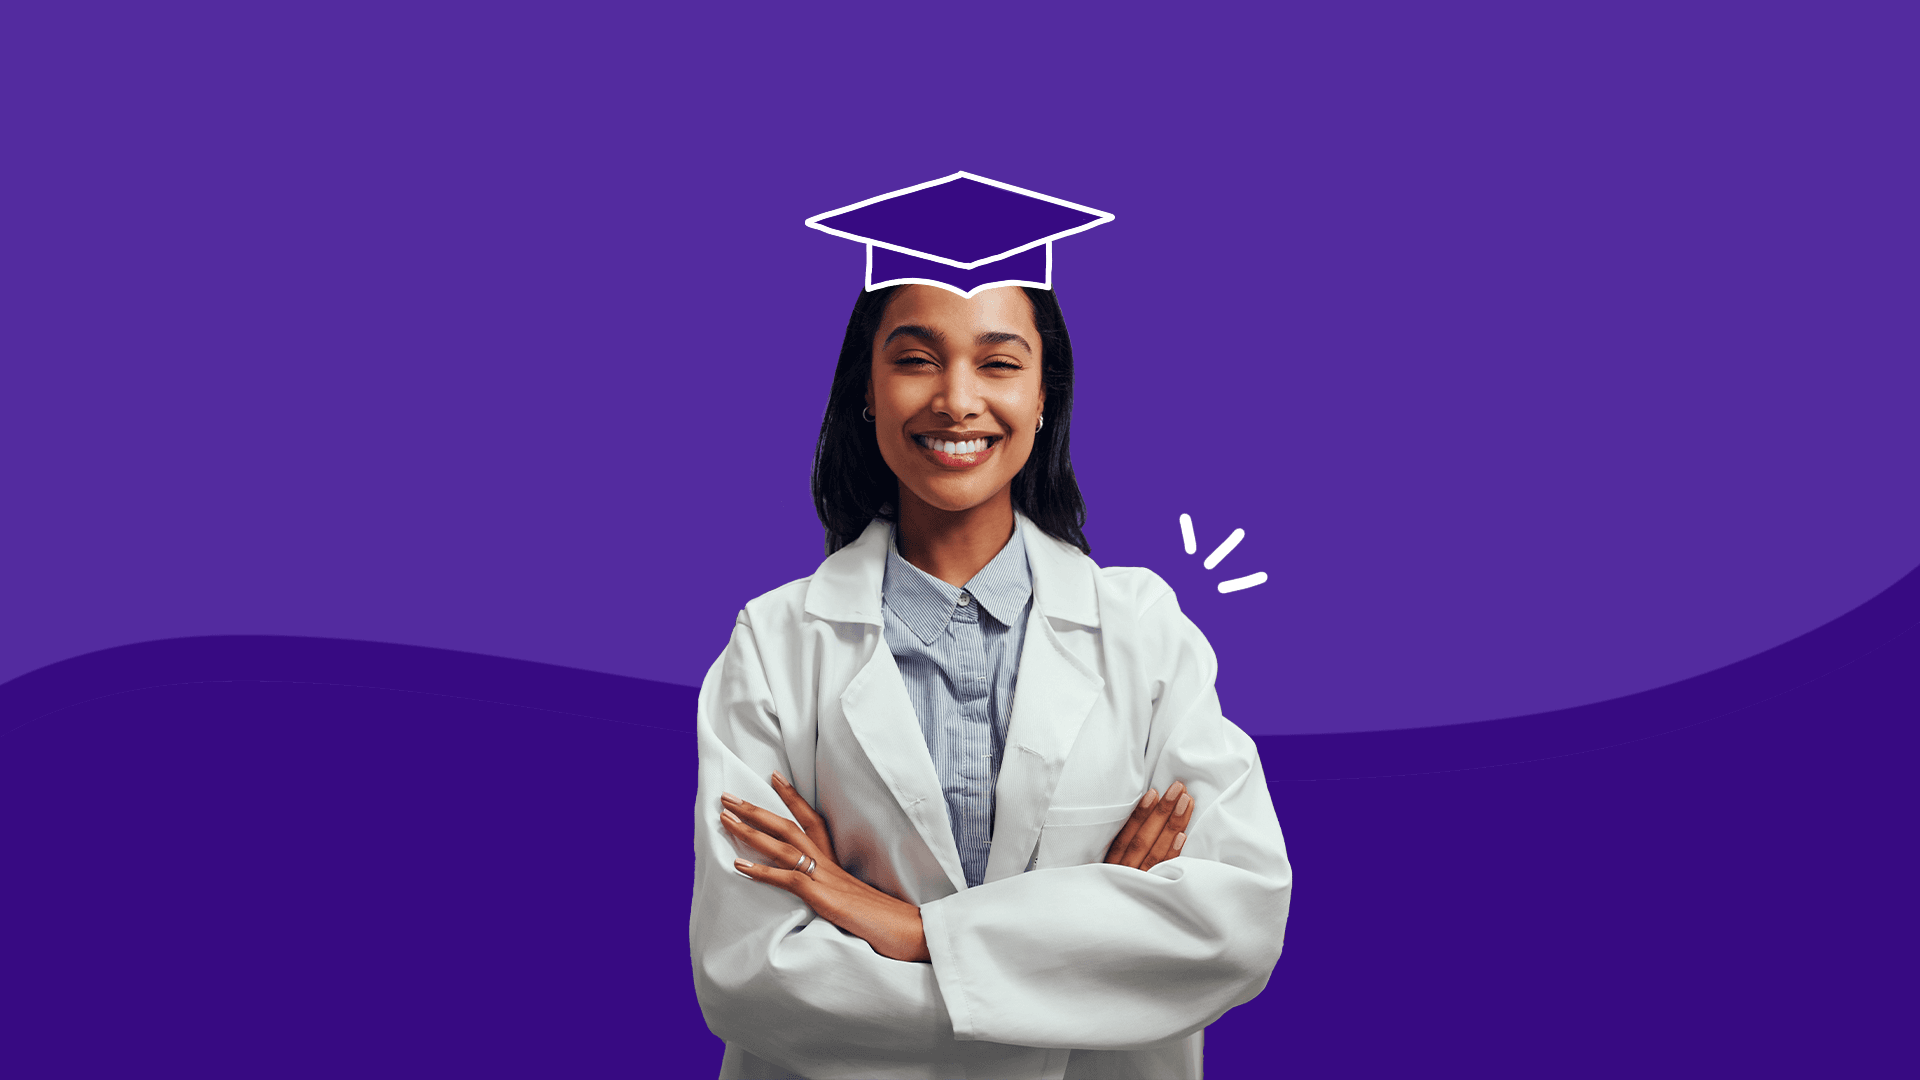 Student’s guide to choosing a career as a pharmacist or pharmacy technician